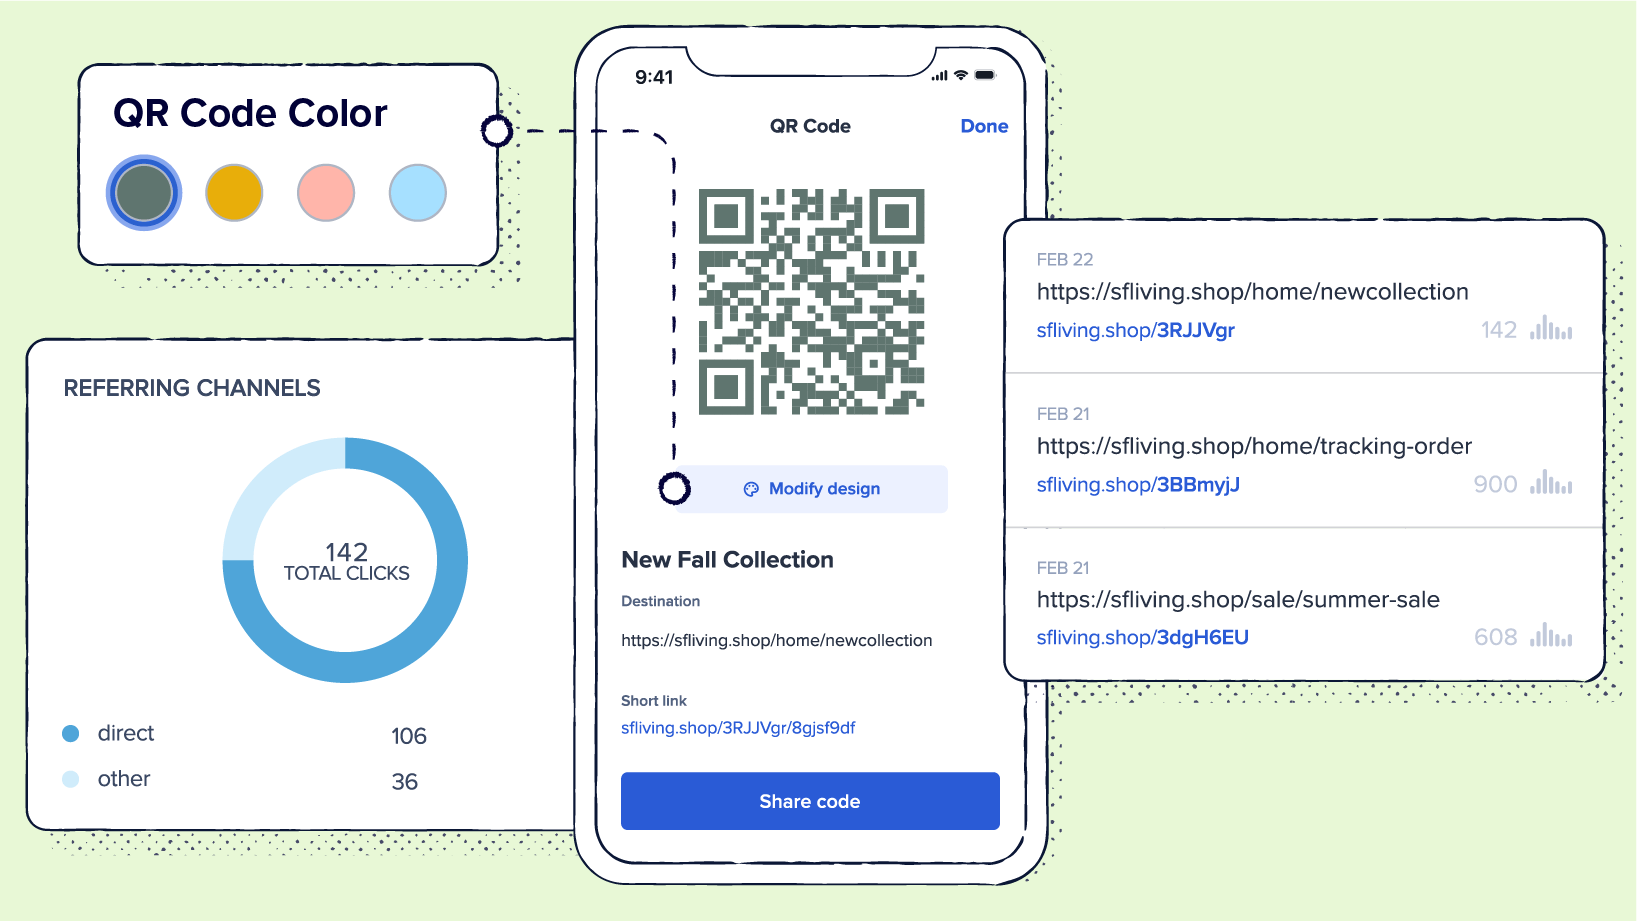 Graphic showing link management, QR Code performance tracking, and QR Code customization in the Bitly mobile app.